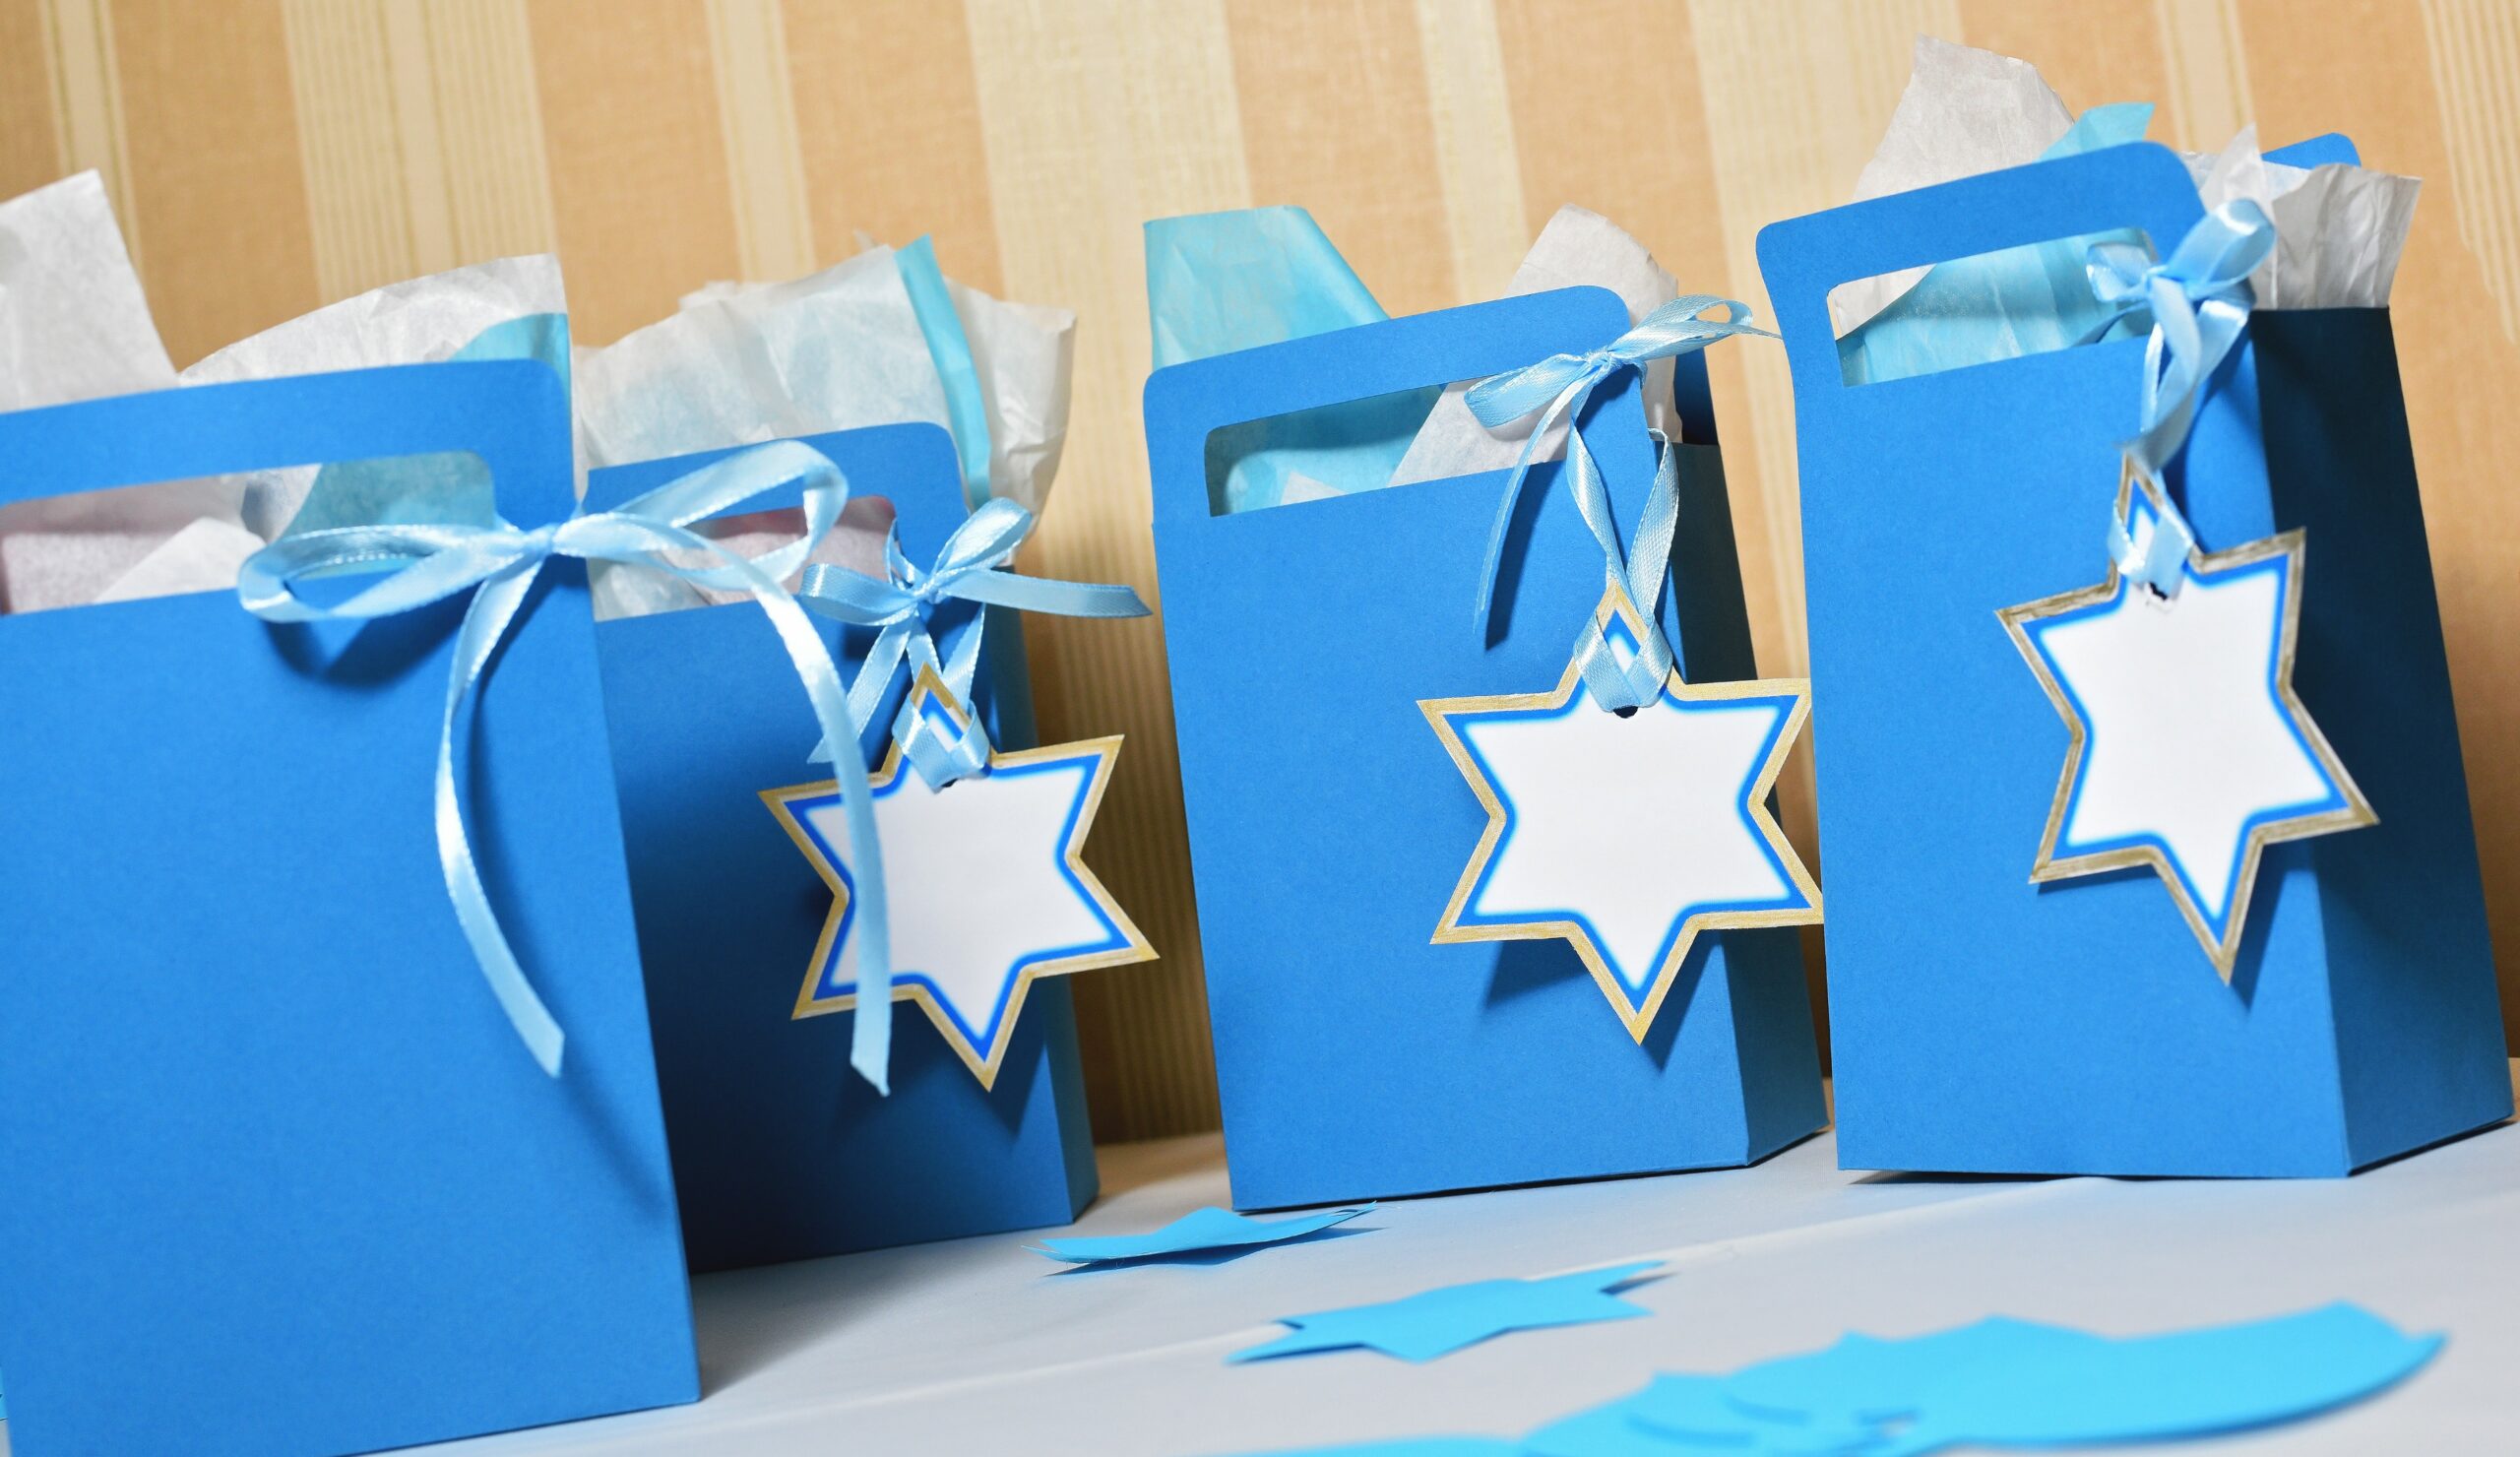 jewish presents in blue paper bags decorated with Star of David